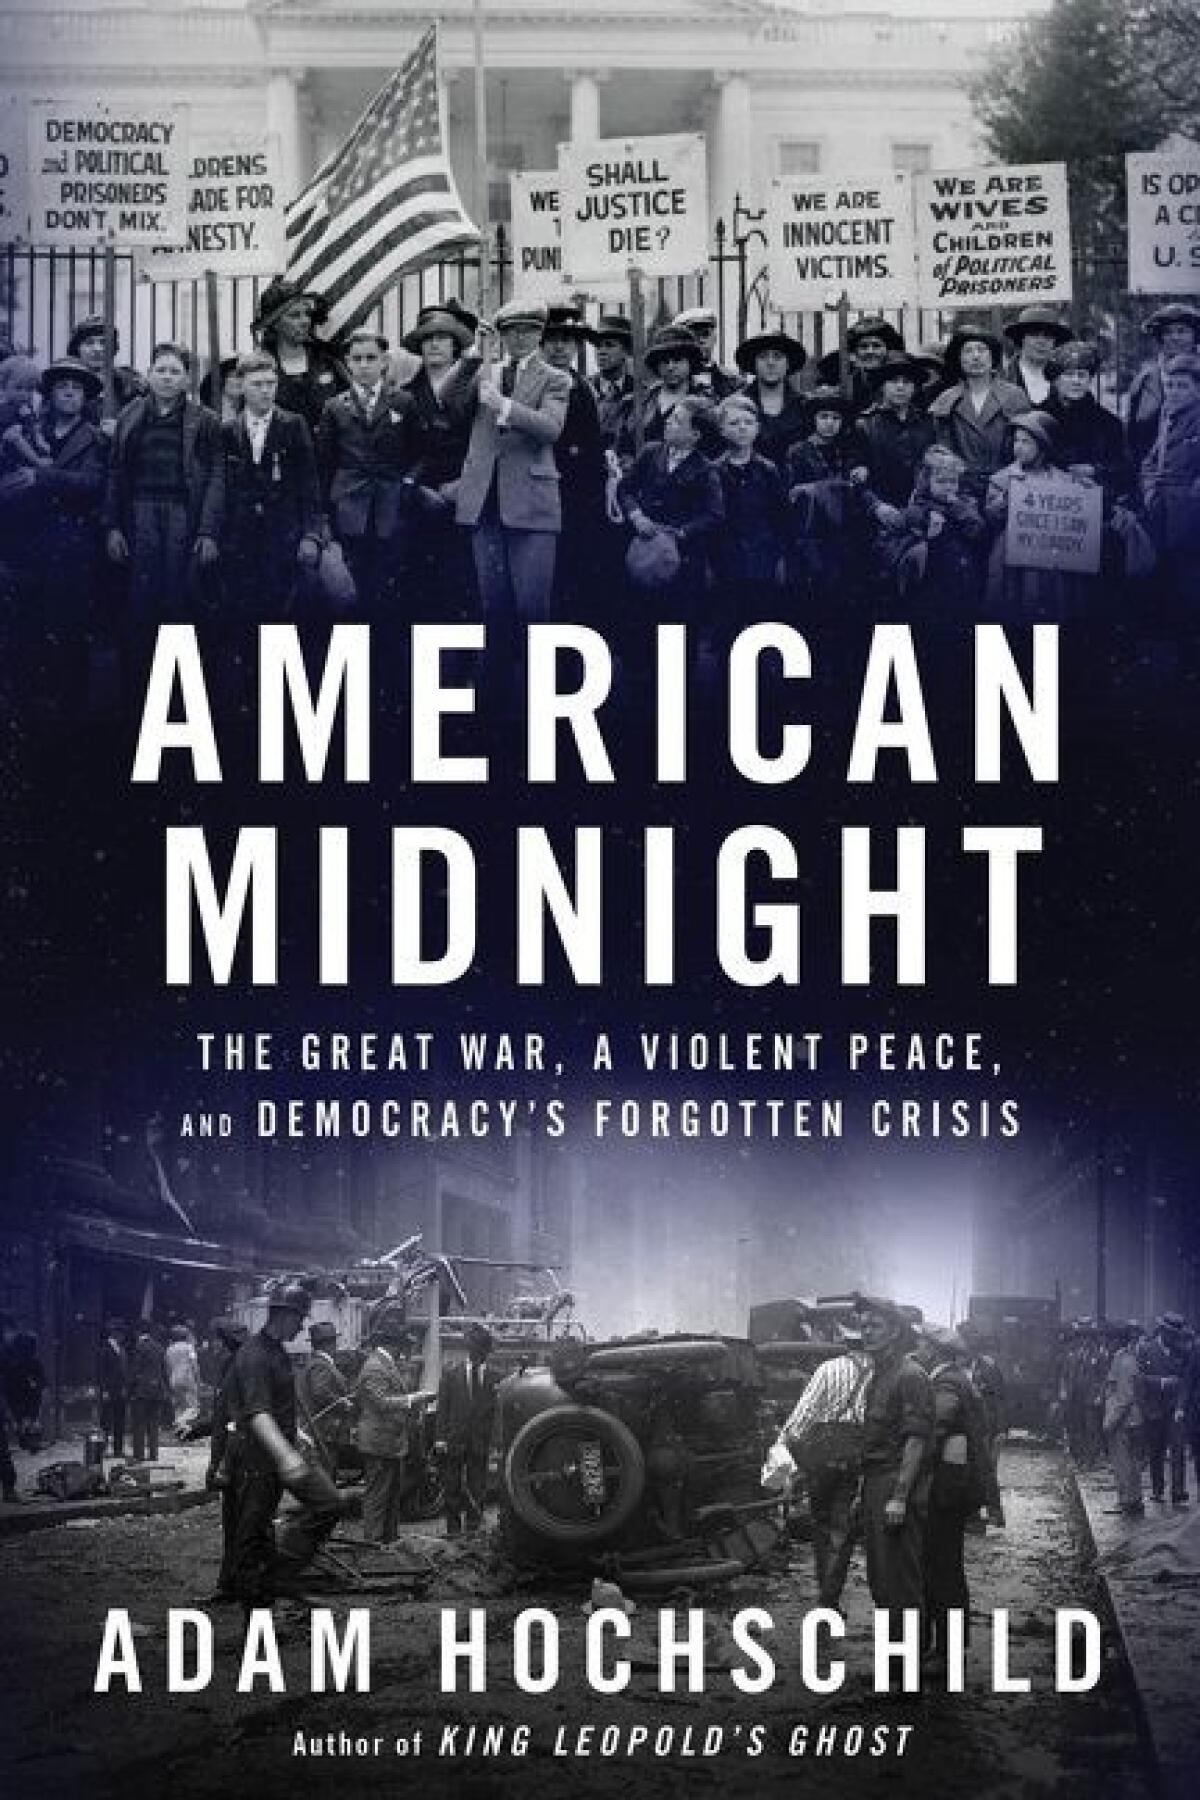 "American Midnight: The Great War, A Violent Peace, and Democracy's Forgotten Crisis" by Adam Hochschild